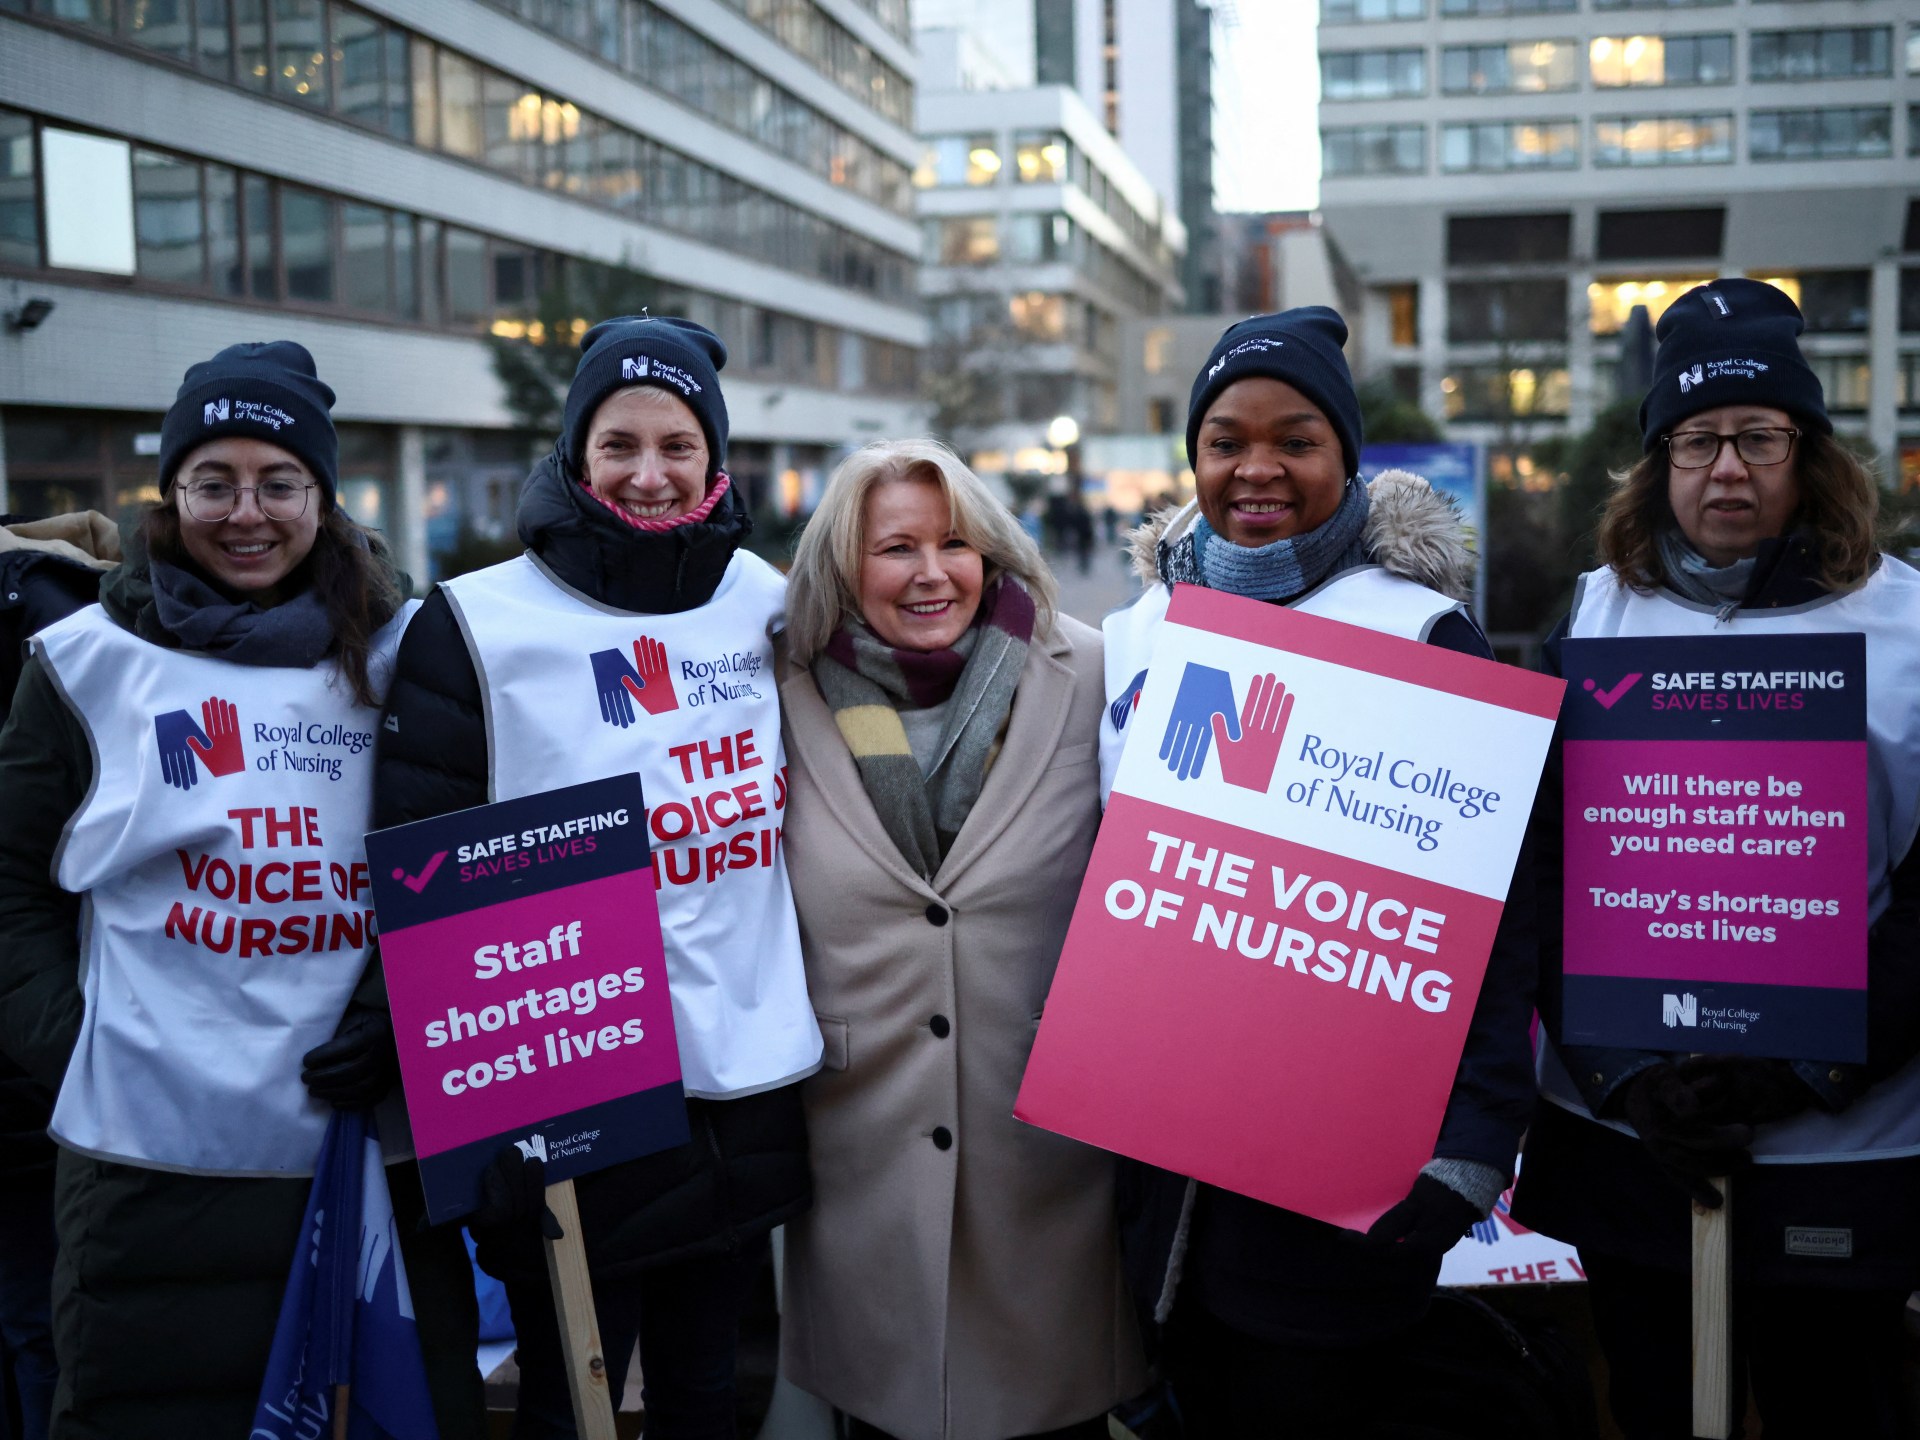 Up to 100,000 nurses stage ‘last resort’ strike in UK over pay